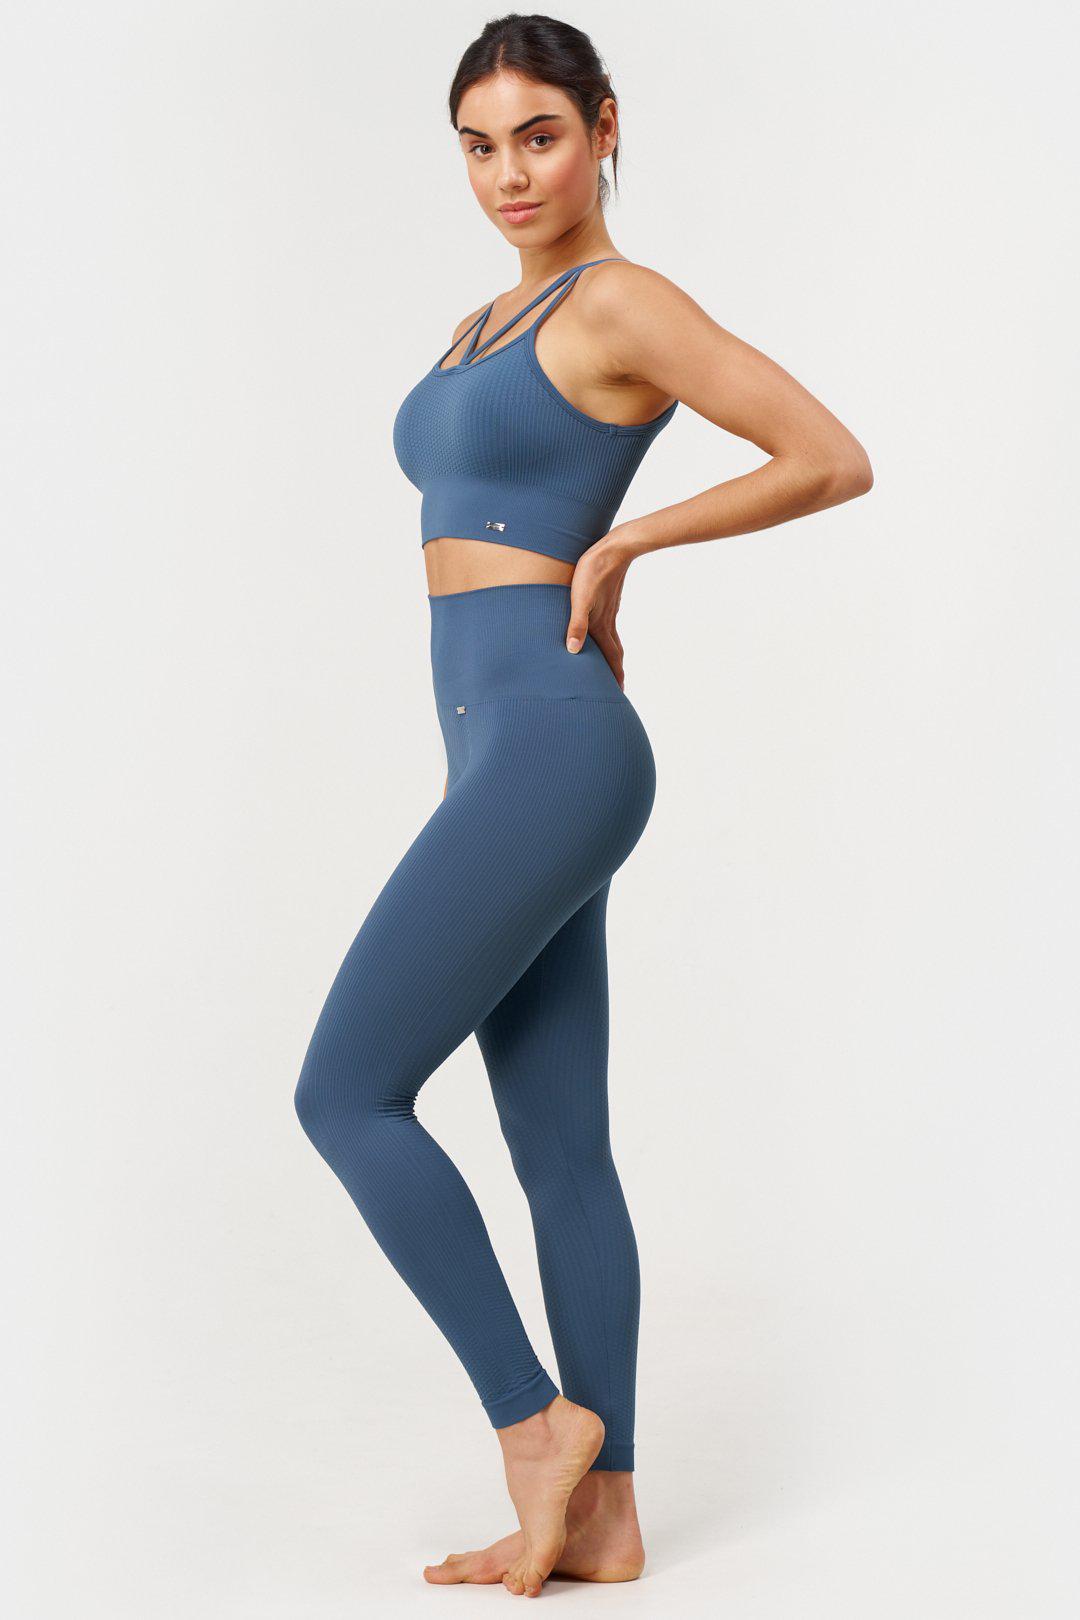 Feel Bra Reversible at Jade-Bras-Shop Sustainable Recycled Yoga Leggings Women's Clothing On-line Barcelona Believe Athletics Sustainable Recycled Yoga Clothes